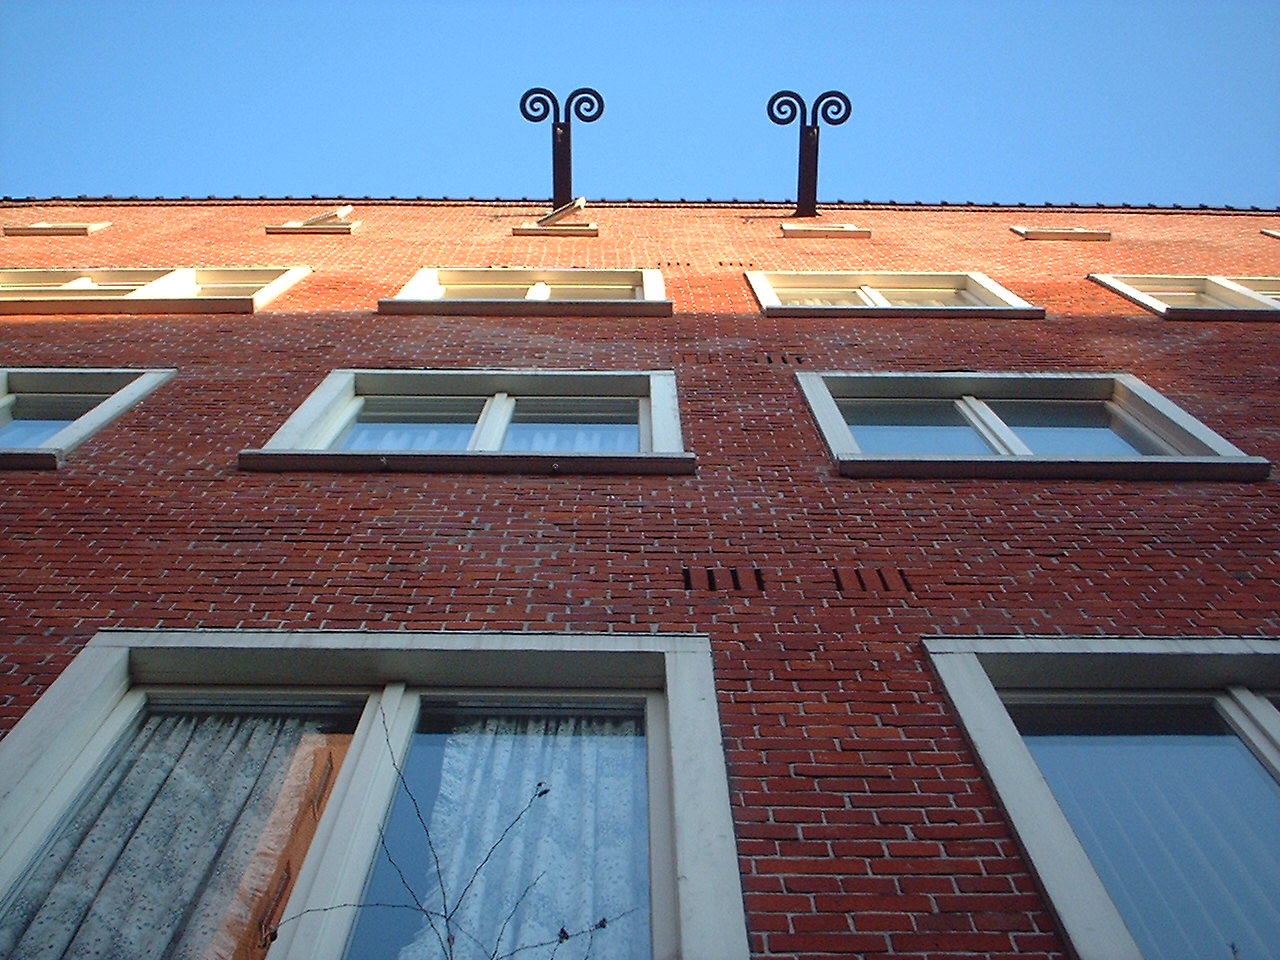 two large windows on top of a brick building